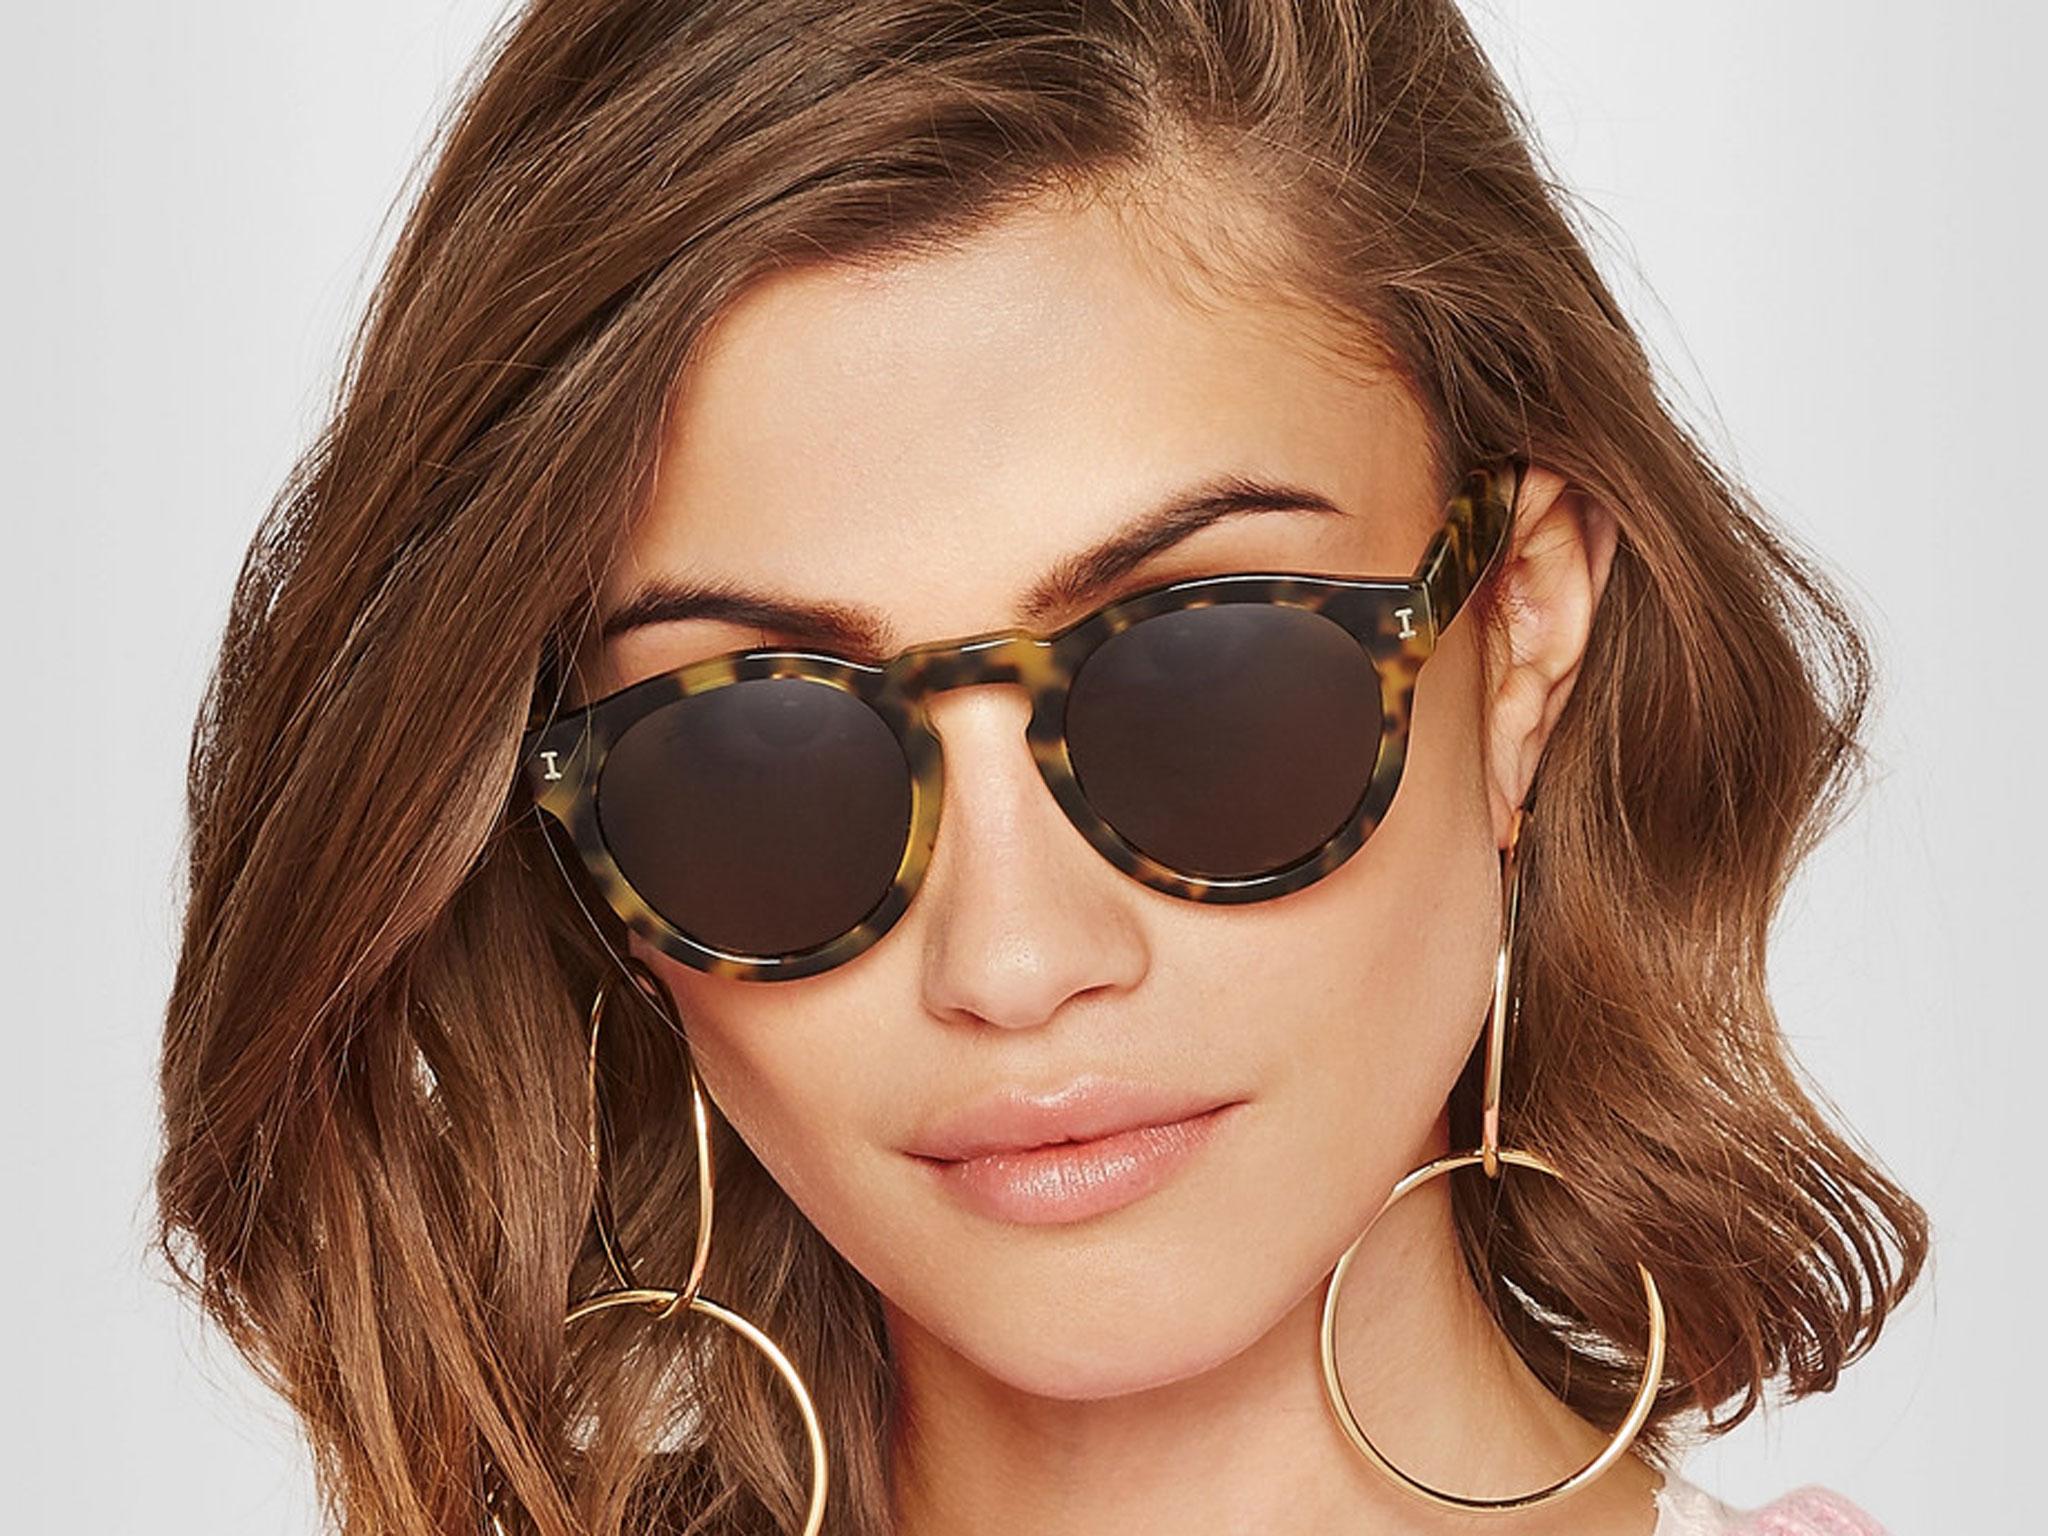 8 best women's sunglasses | The Independent